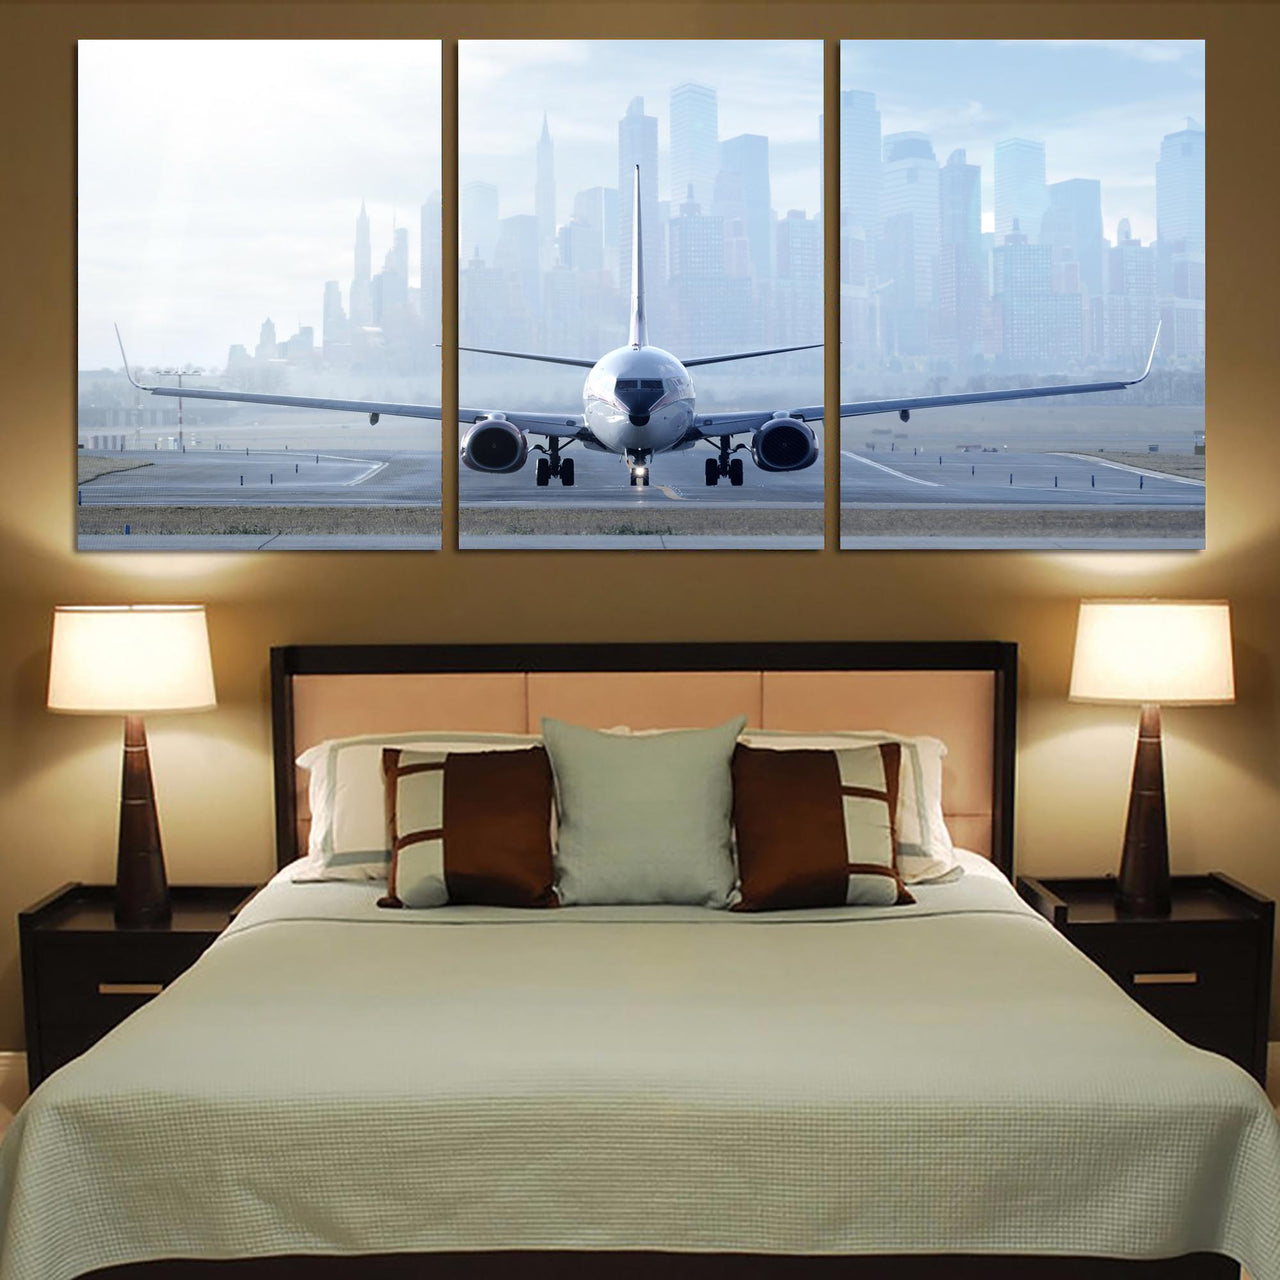 Boeing 737 & City View Behind Printed Canvas Posters (3 Pieces)